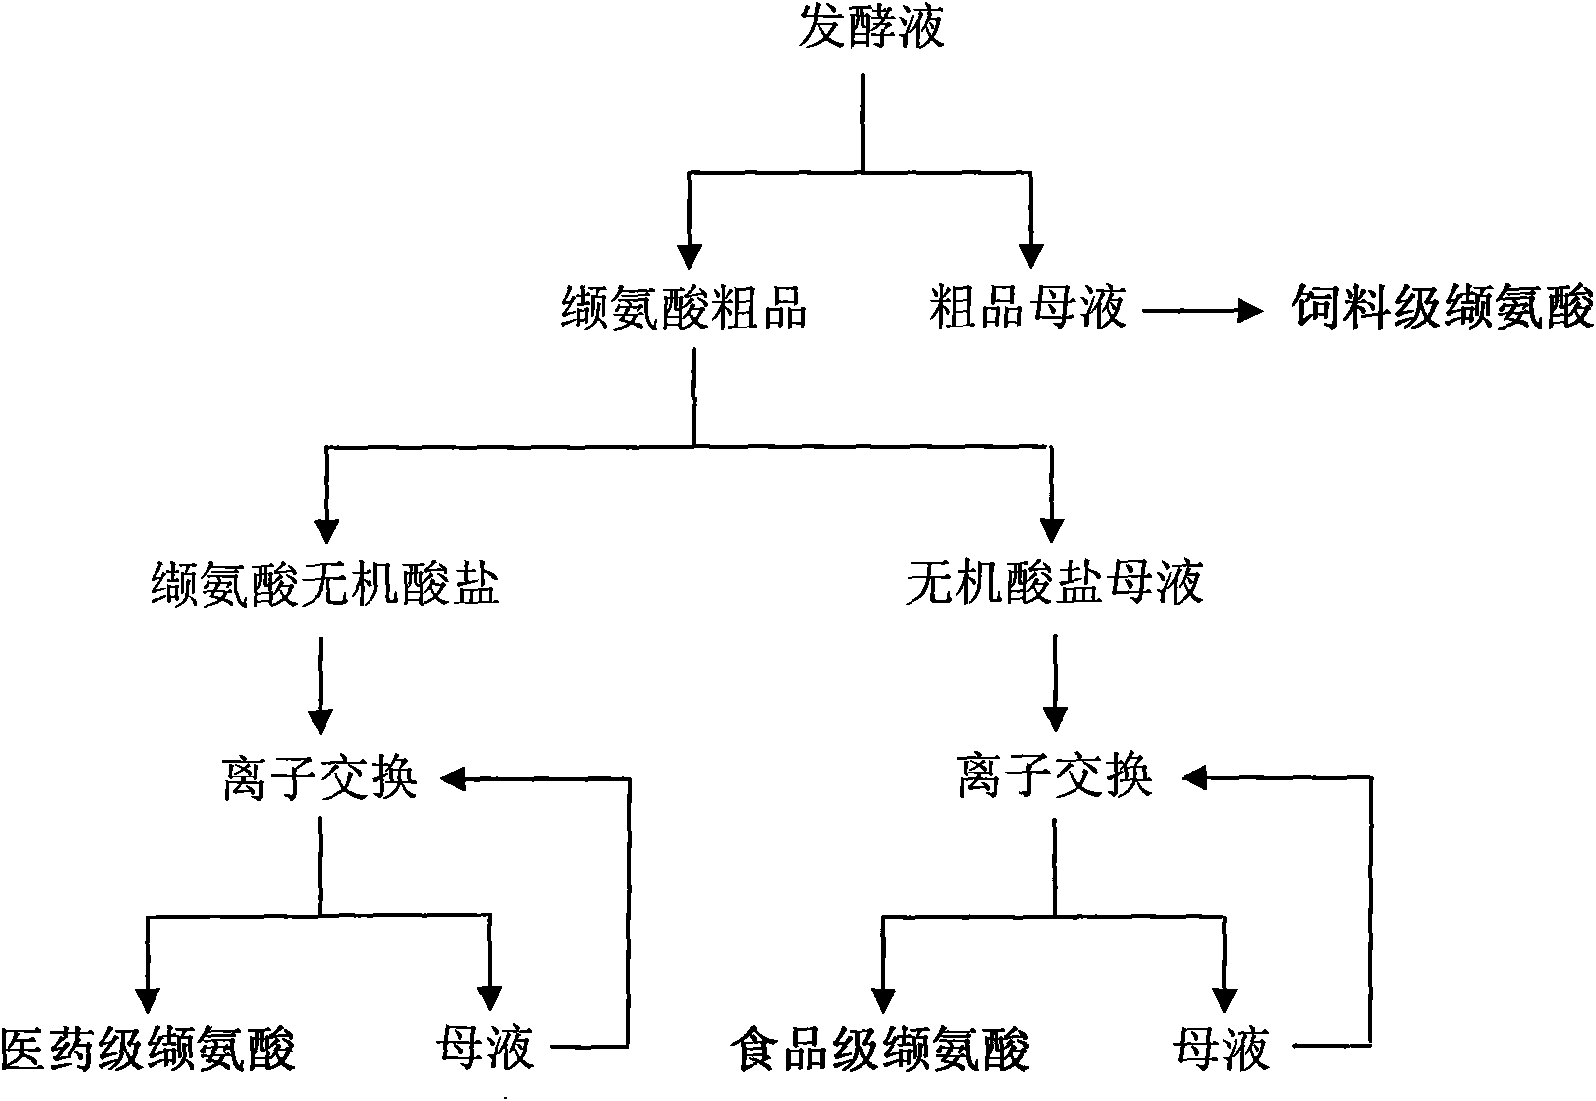 Novel process for producing valine